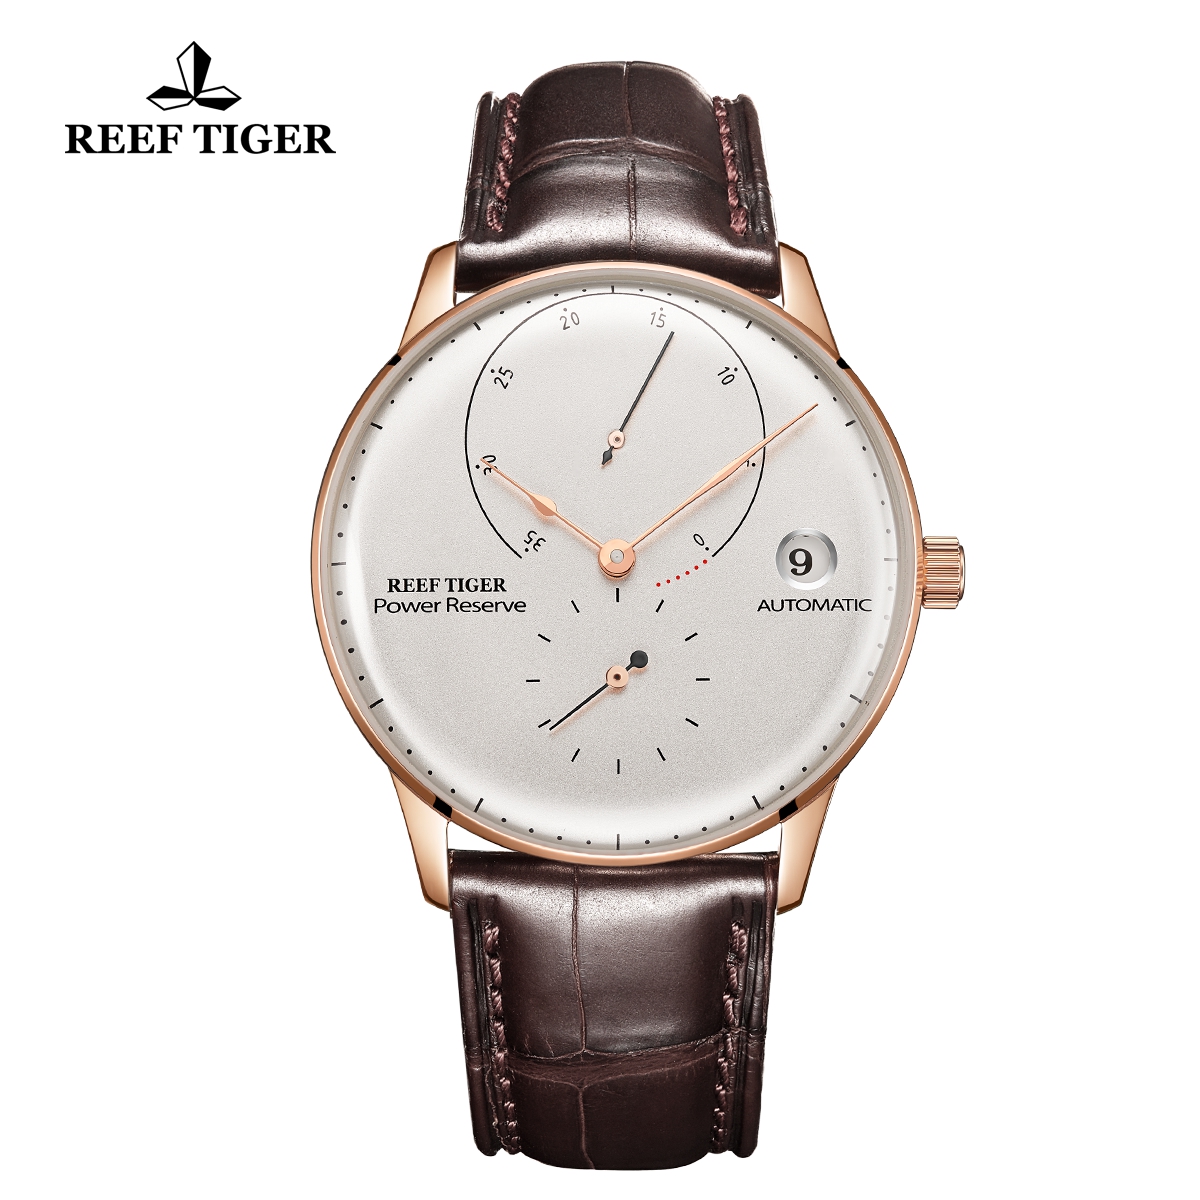 Reef Tiger Seattle Navy II Top Brand Luxury Rose Gold White Dial Leather Automatic Watch RGA82B0-2-YWS